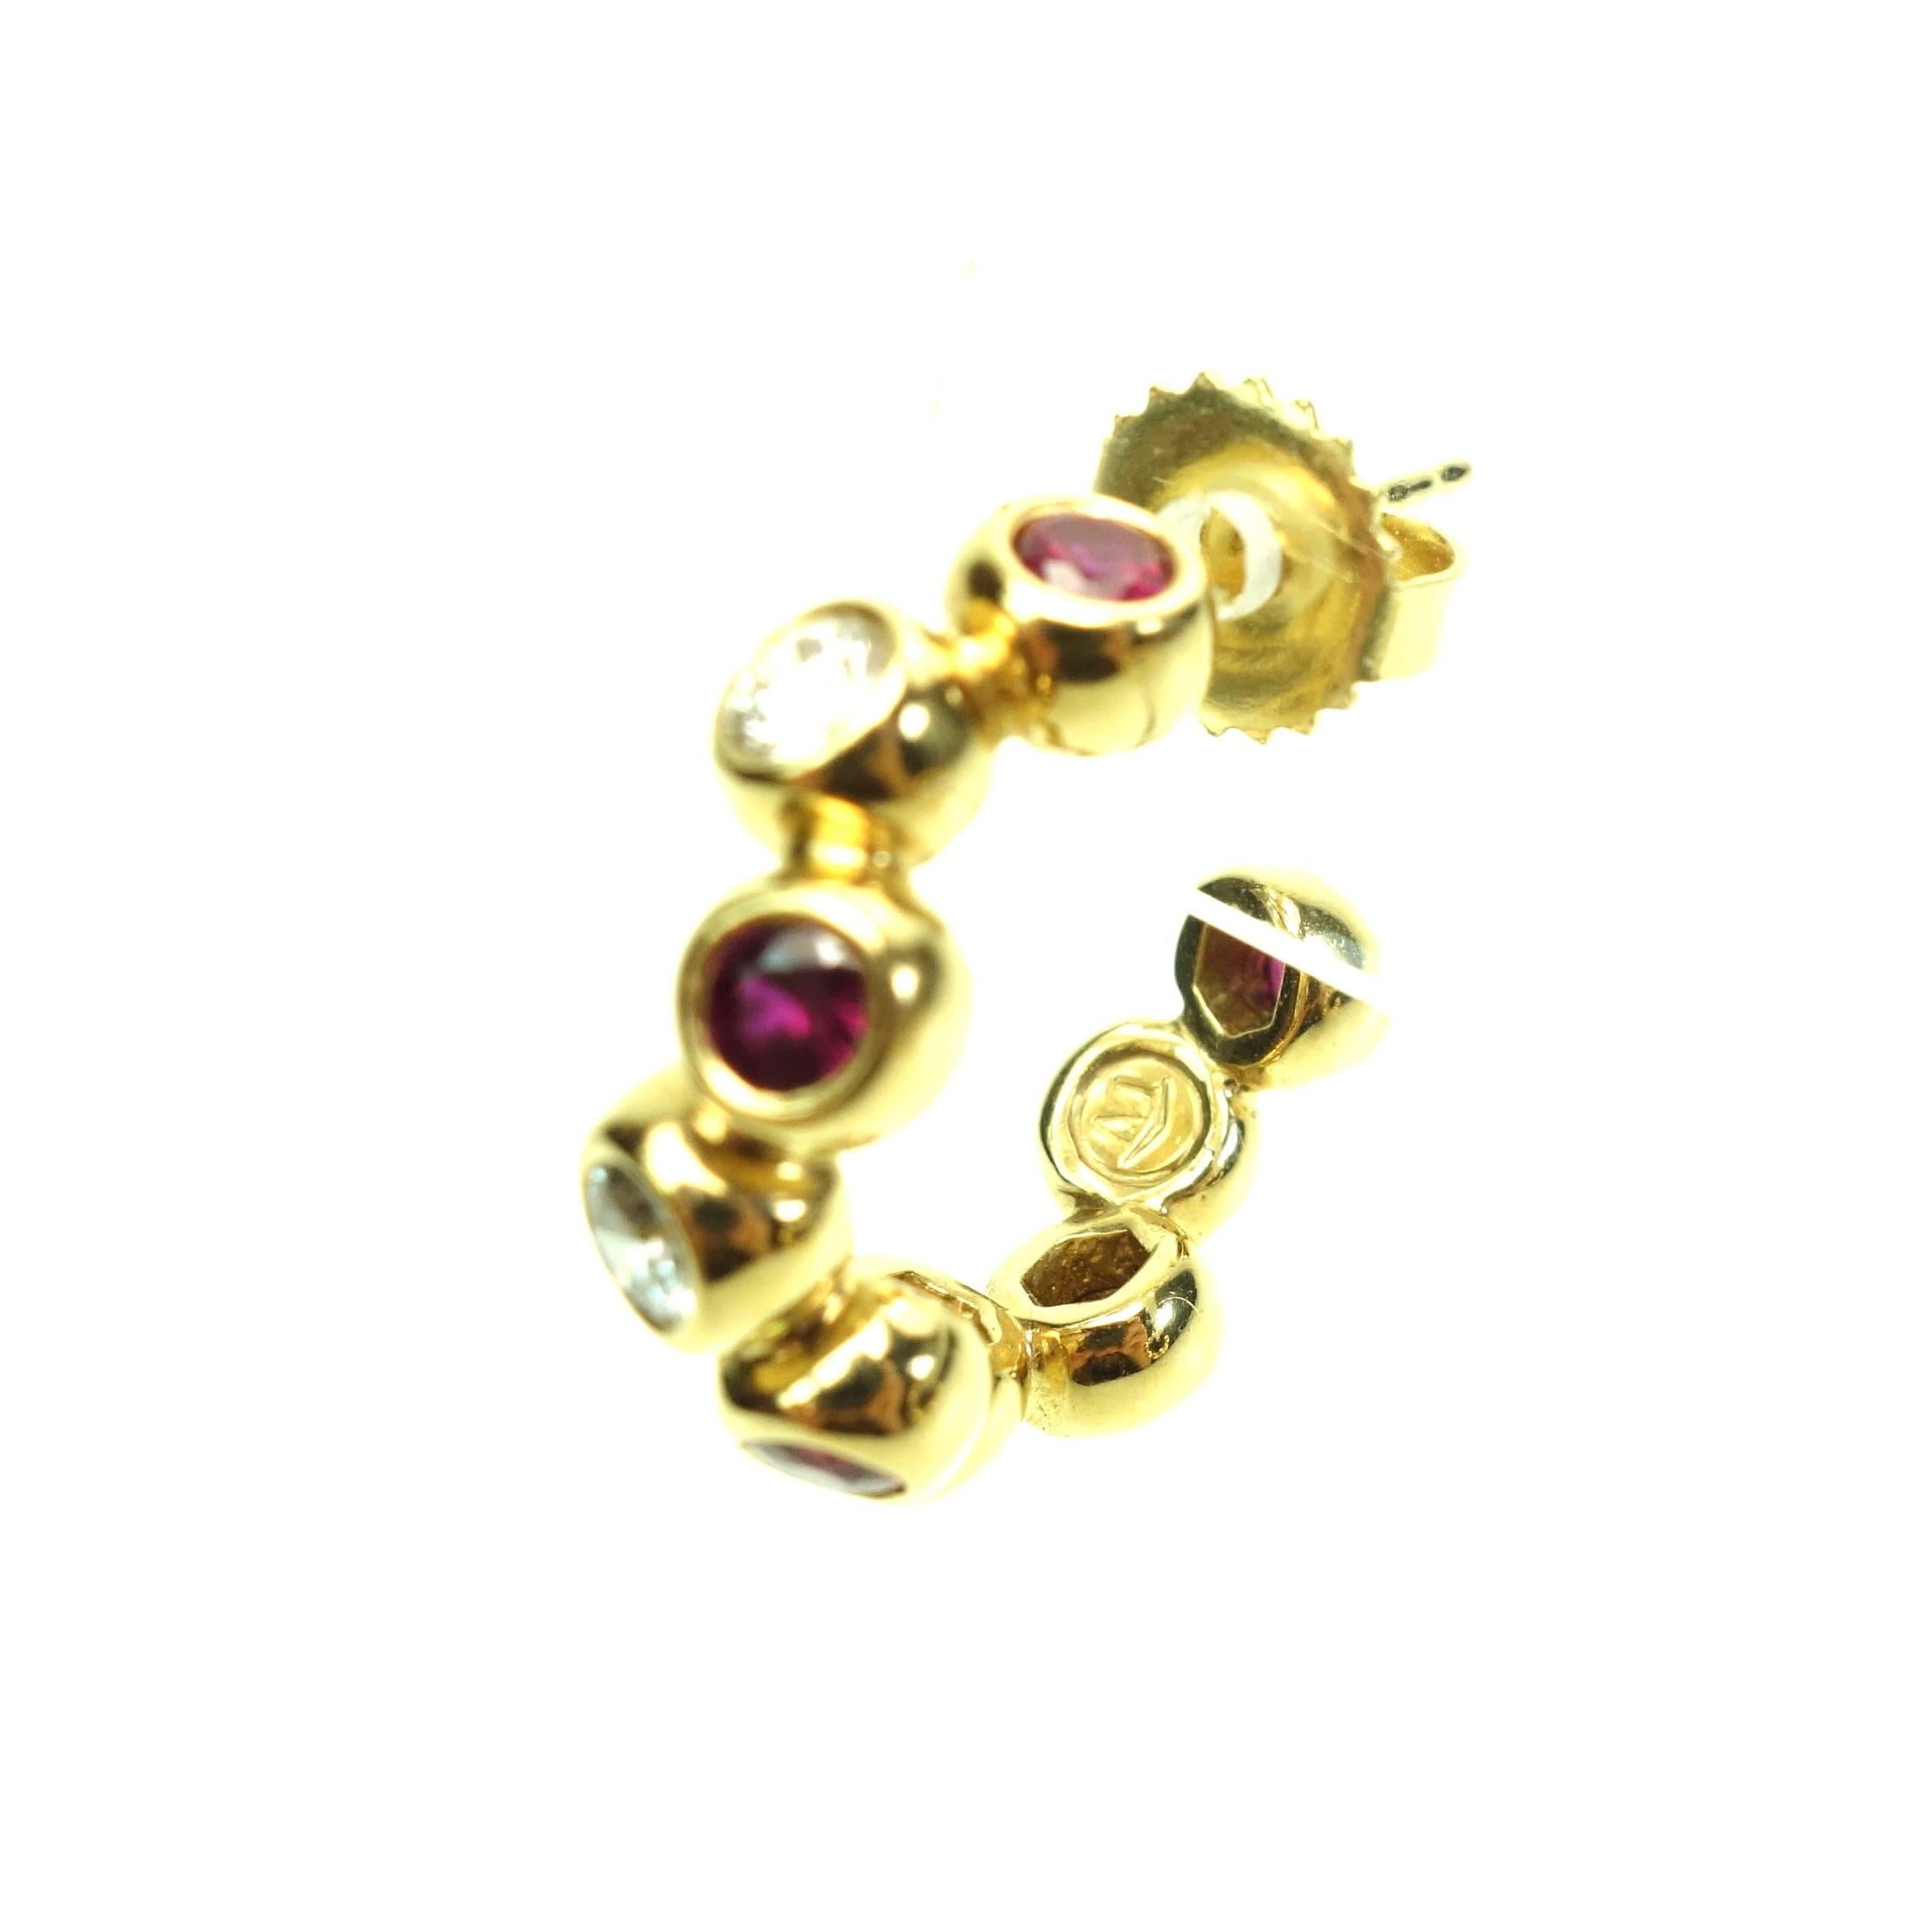 Amazing 18K yellow gold ruby and diamond hoop earrings by Movado. Rare.
Each earring features nine alternating round rubies and diamonds individually set in wide gold bezels. The bezels are off-set, creating a slightly zigzagging design. 
8